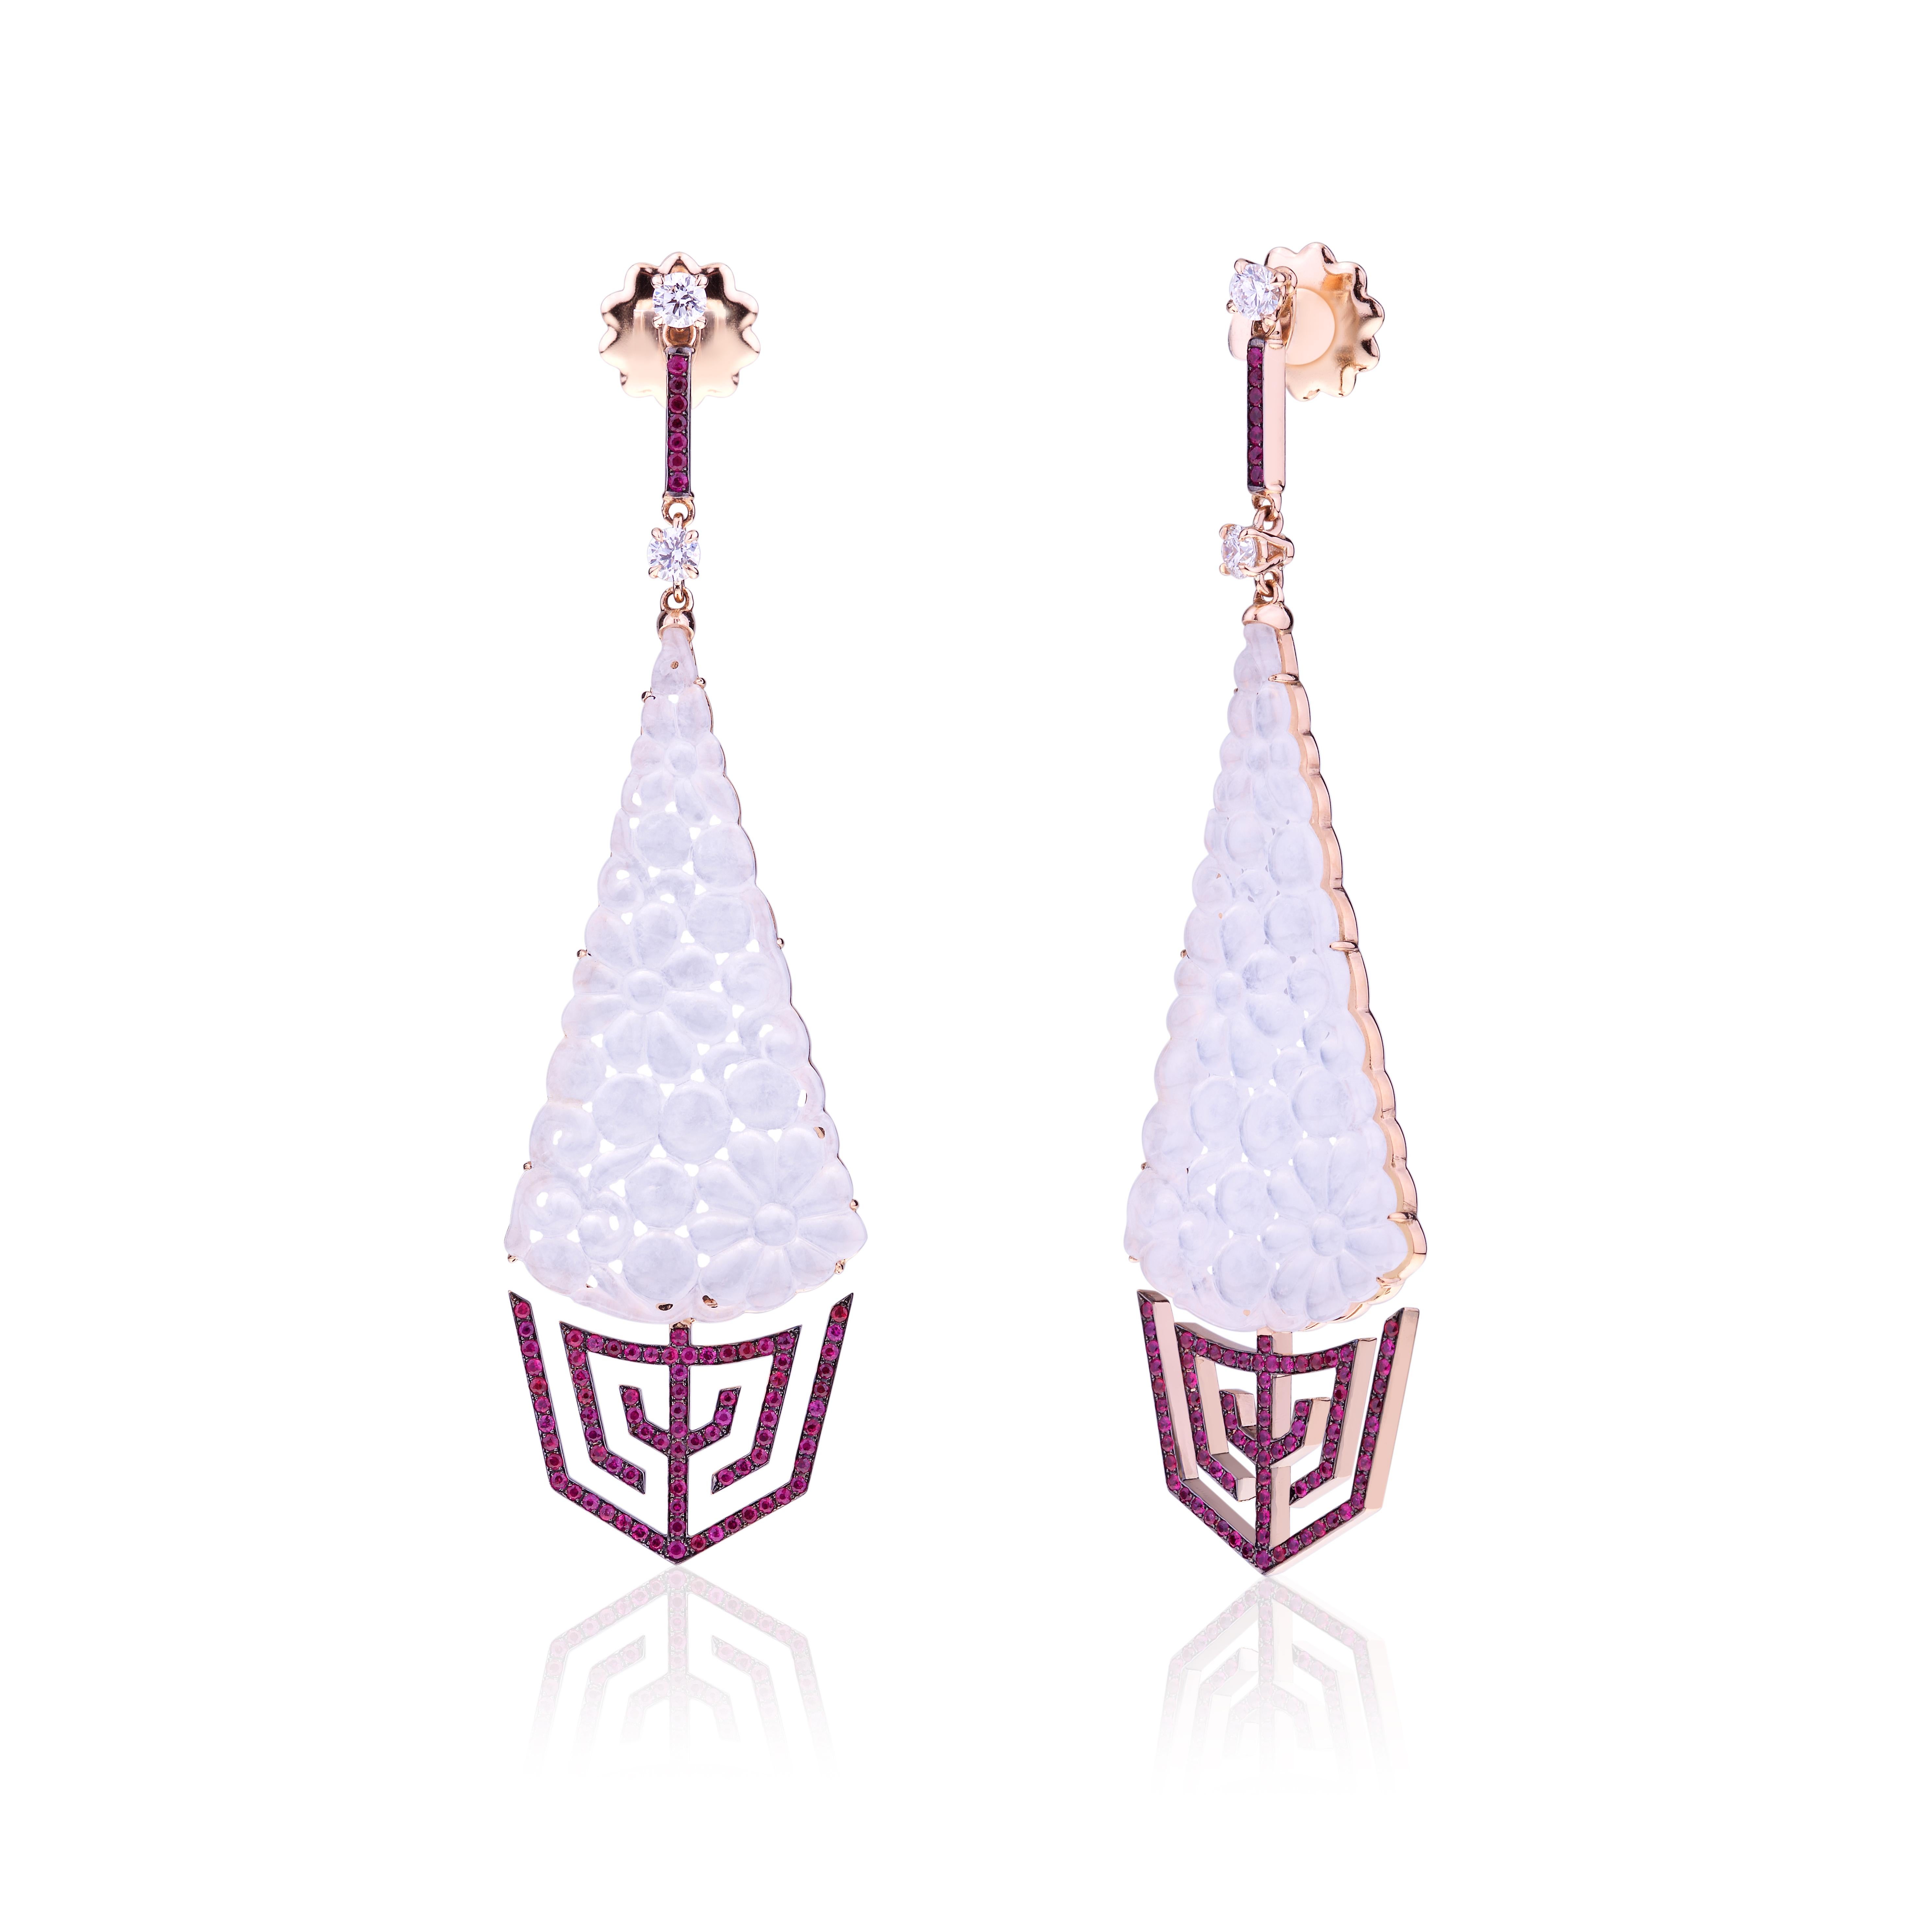 Angeletti Earrings Rose Gold Carved Drop Translucent White Jade with Ruby and Diamonds.
The Live Tradition of Jadeite in a Contemporary Italian Design.
Tradition in Carved Jadeite, set in More Contemporary Design, Manifactured in Rome. Customized